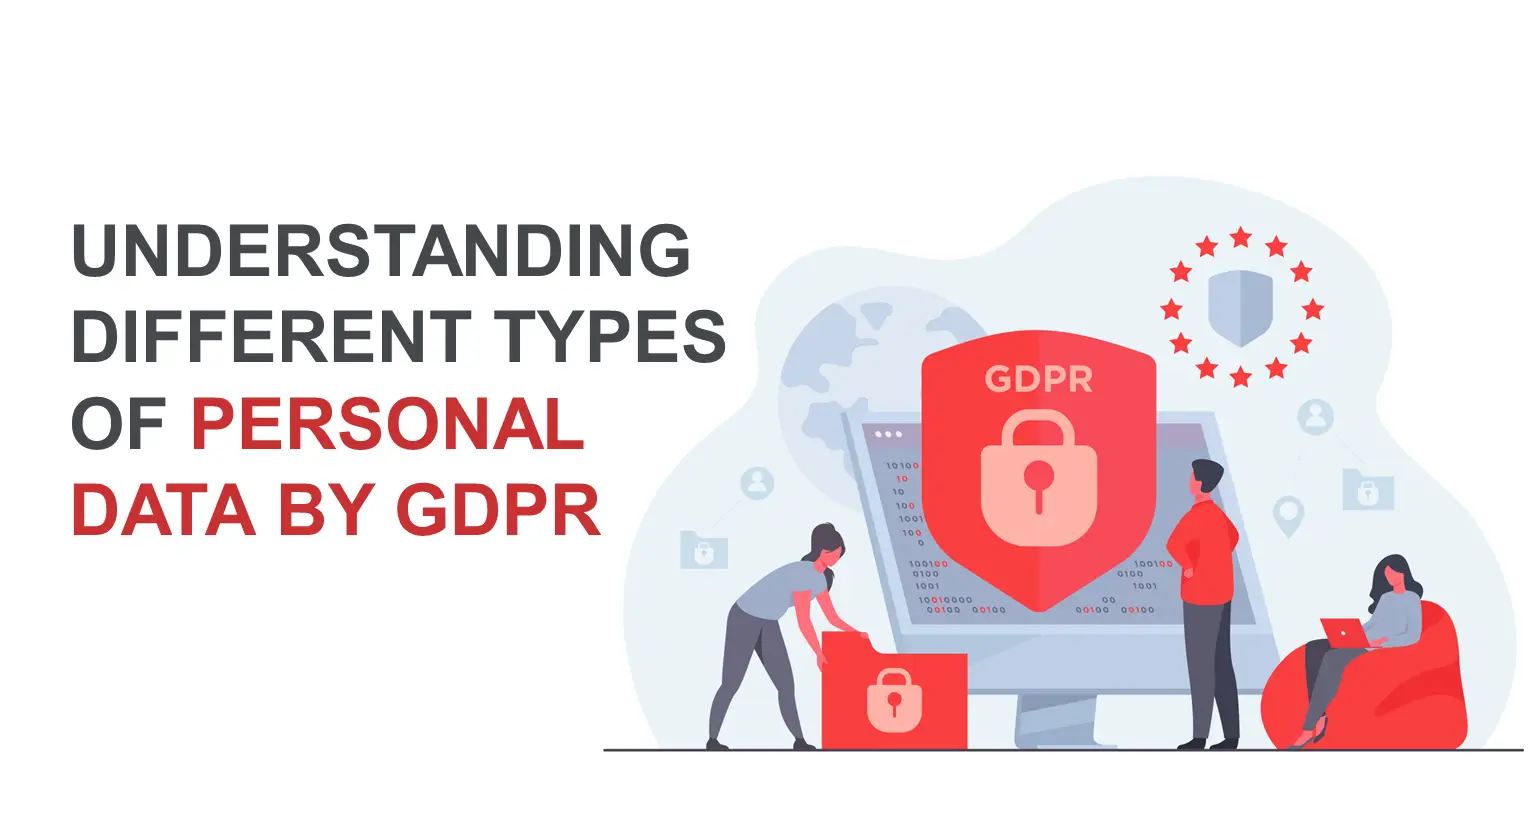 Understanding Different Types of Personal Data by GDPR